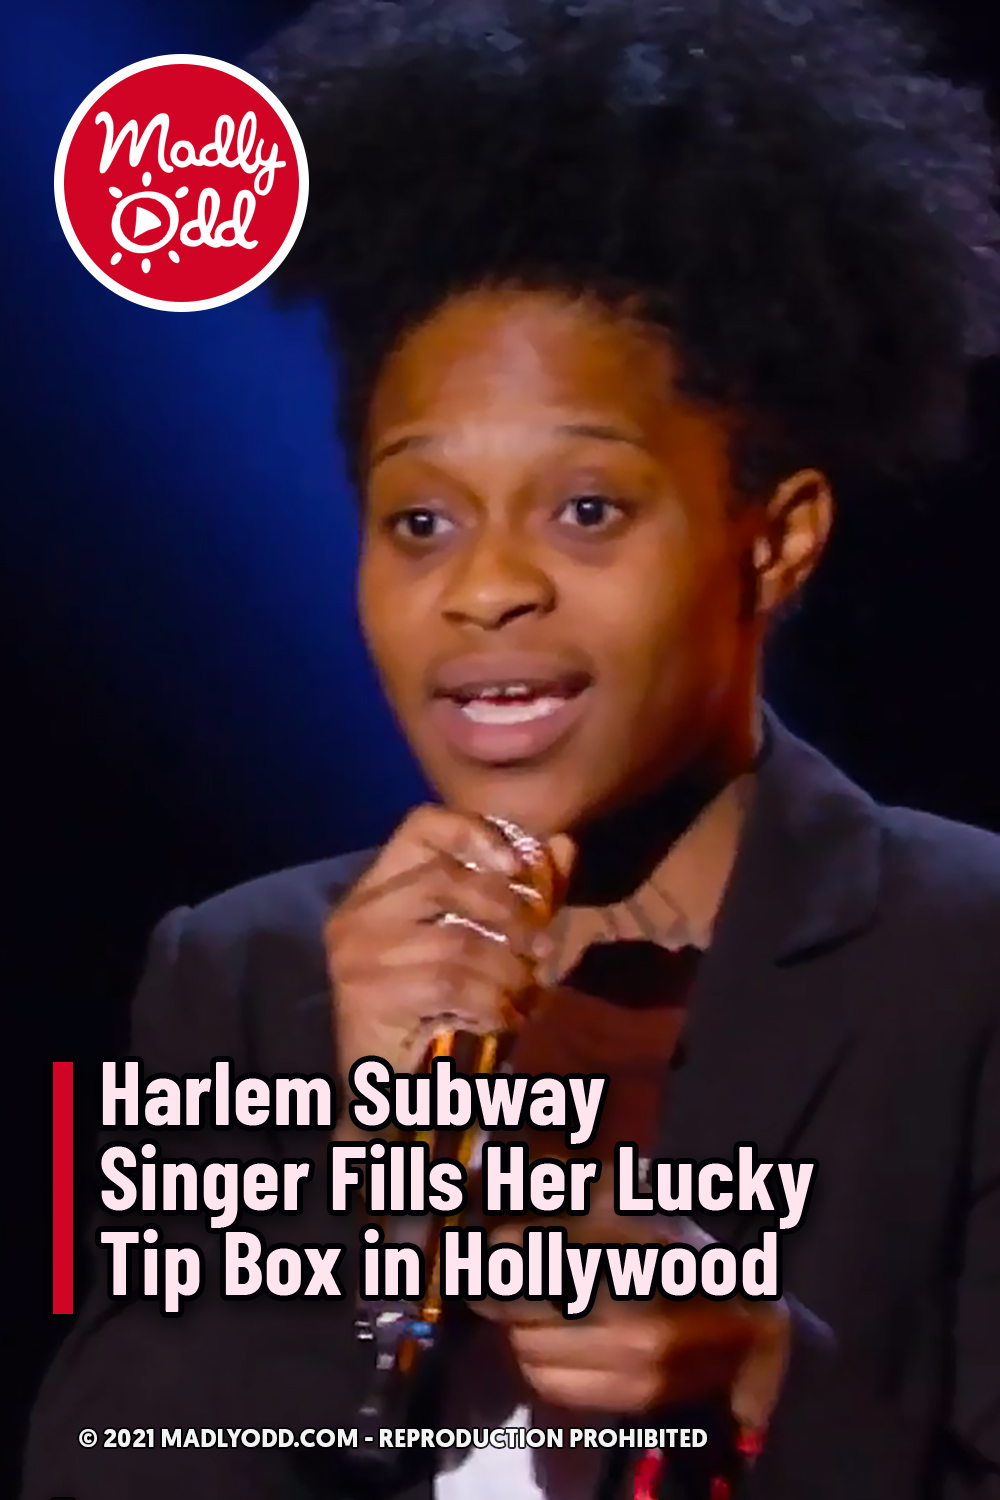 Harlem Subway Singer Fills Her Lucky Tip Box in Hollywood